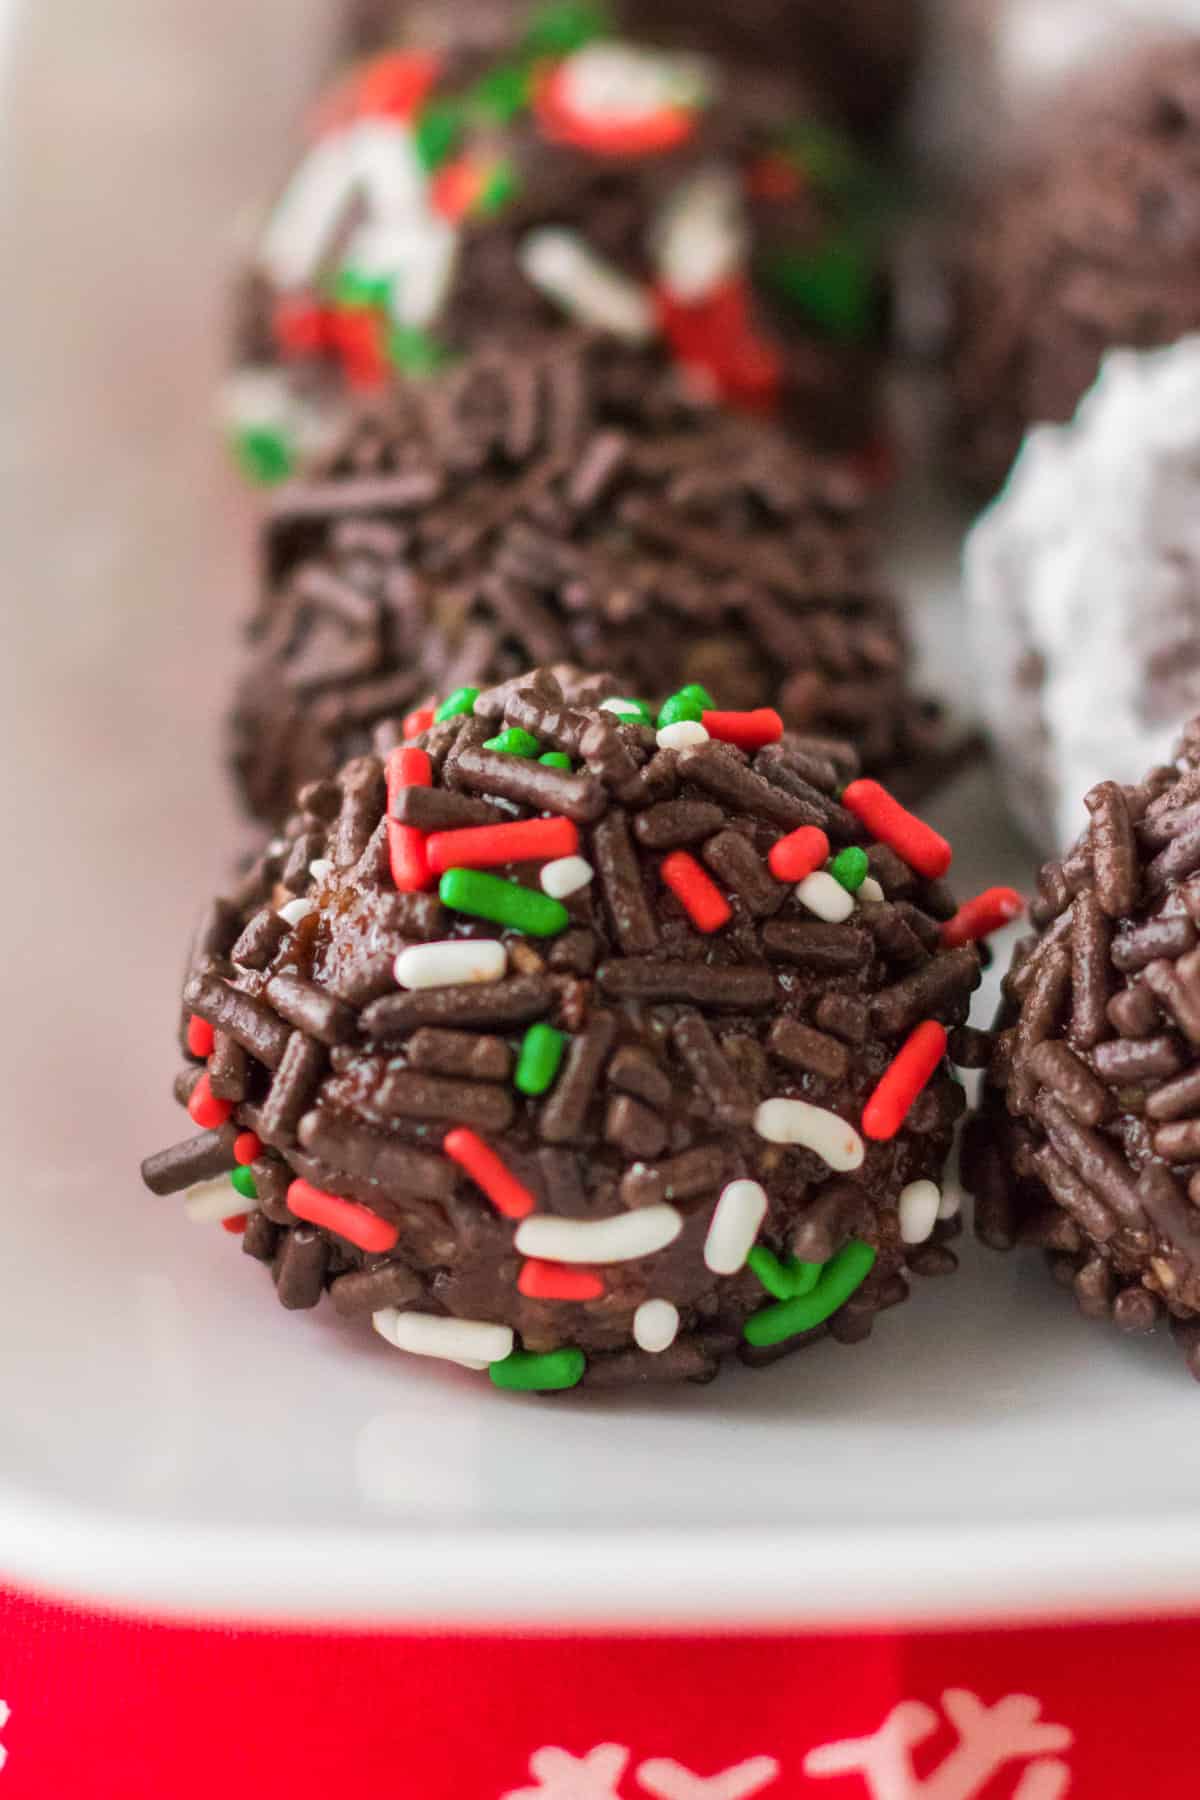 Classic rum ball with holiday sprinkles.